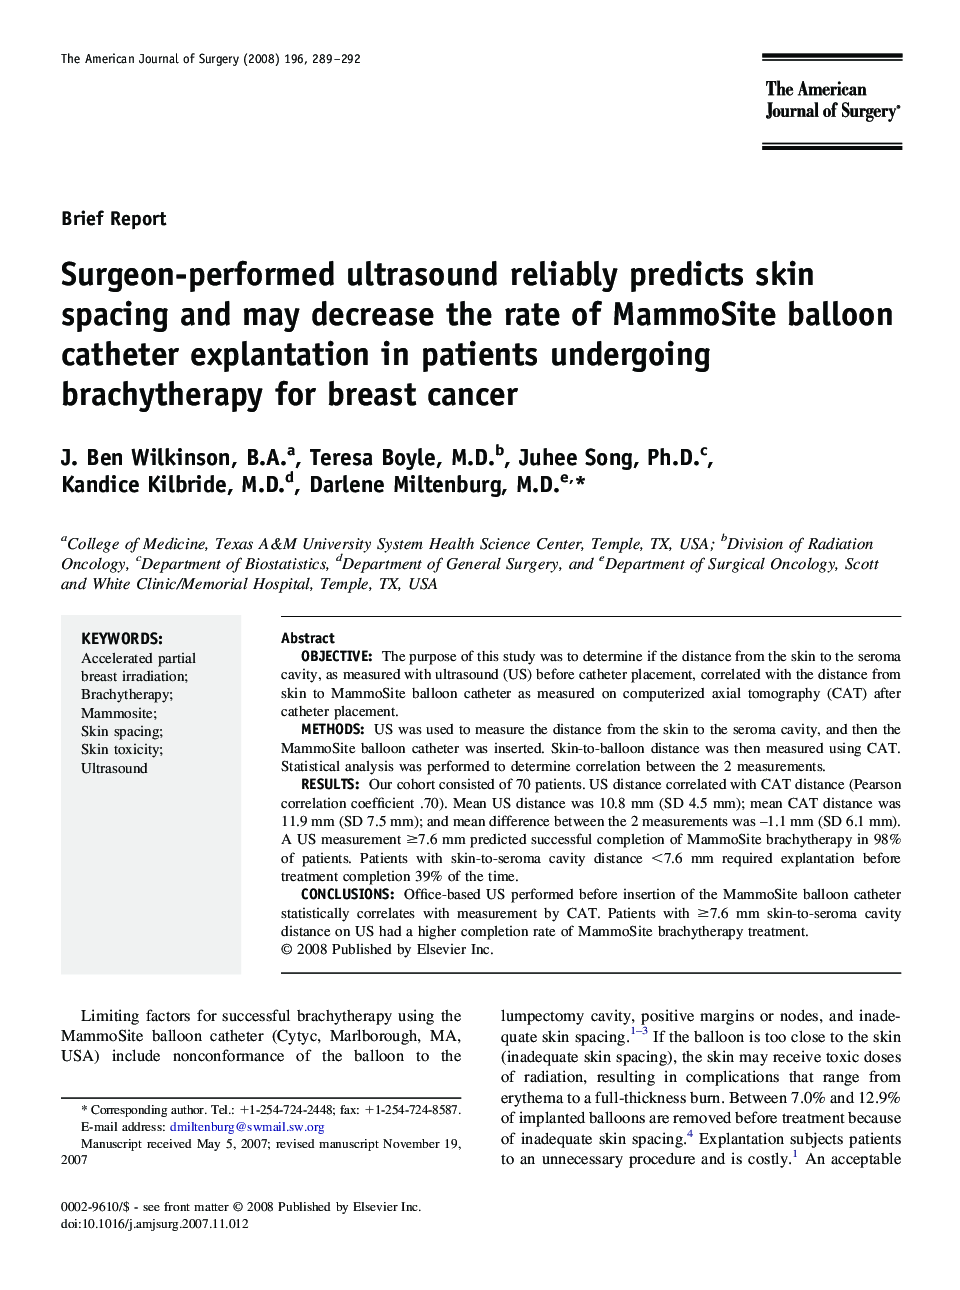 Surgeon-performed ultrasound reliably predicts skin spacing and may decrease the rate of MammoSite balloon catheter explantation in patients undergoing brachytherapy for breast cancer